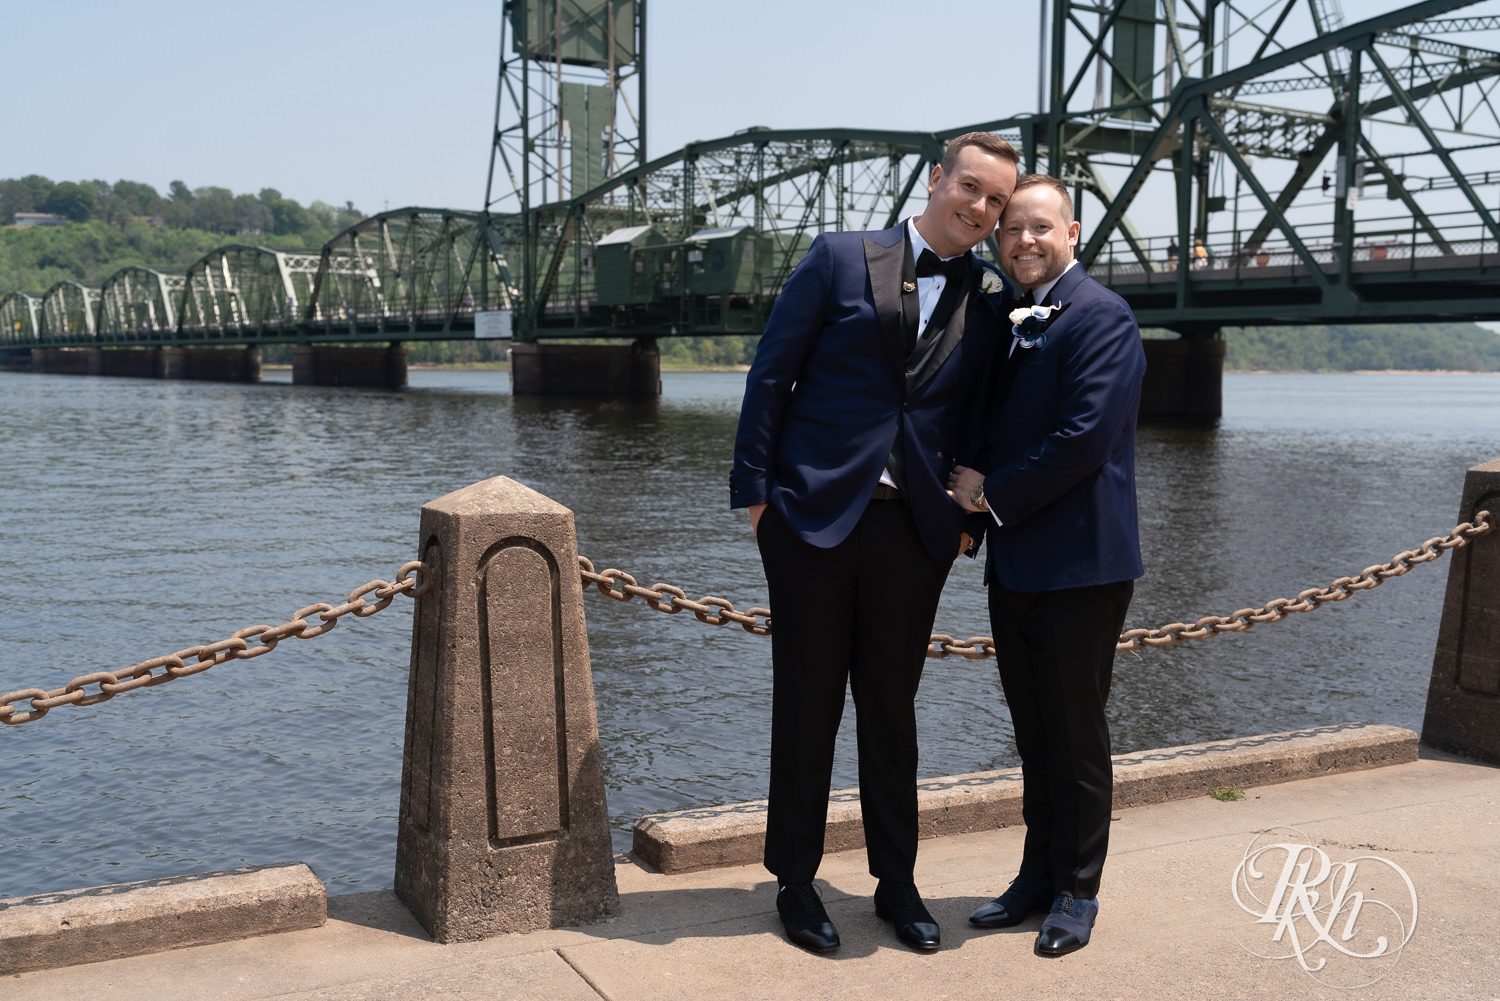 Grooms in blue tuxedos smile in front of river before gay wedding in Stillwater, Minnesota.